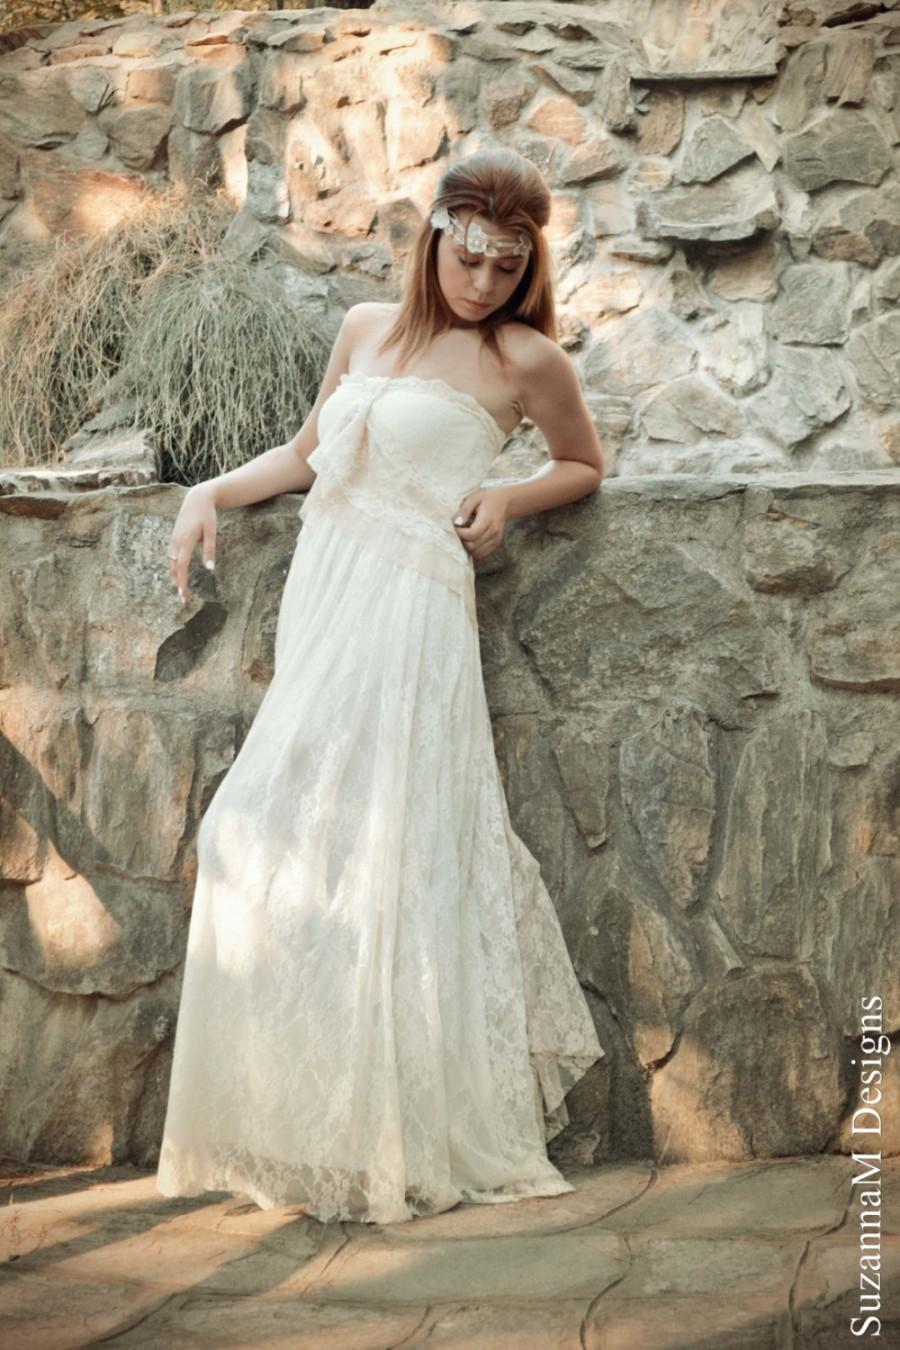 Wedding - Ivory Lace Bohemian Wedding Dress Long Strappless Bridal Wedding Retro Gown with Cream Lace Details - Handmade by SuzannaM Designs